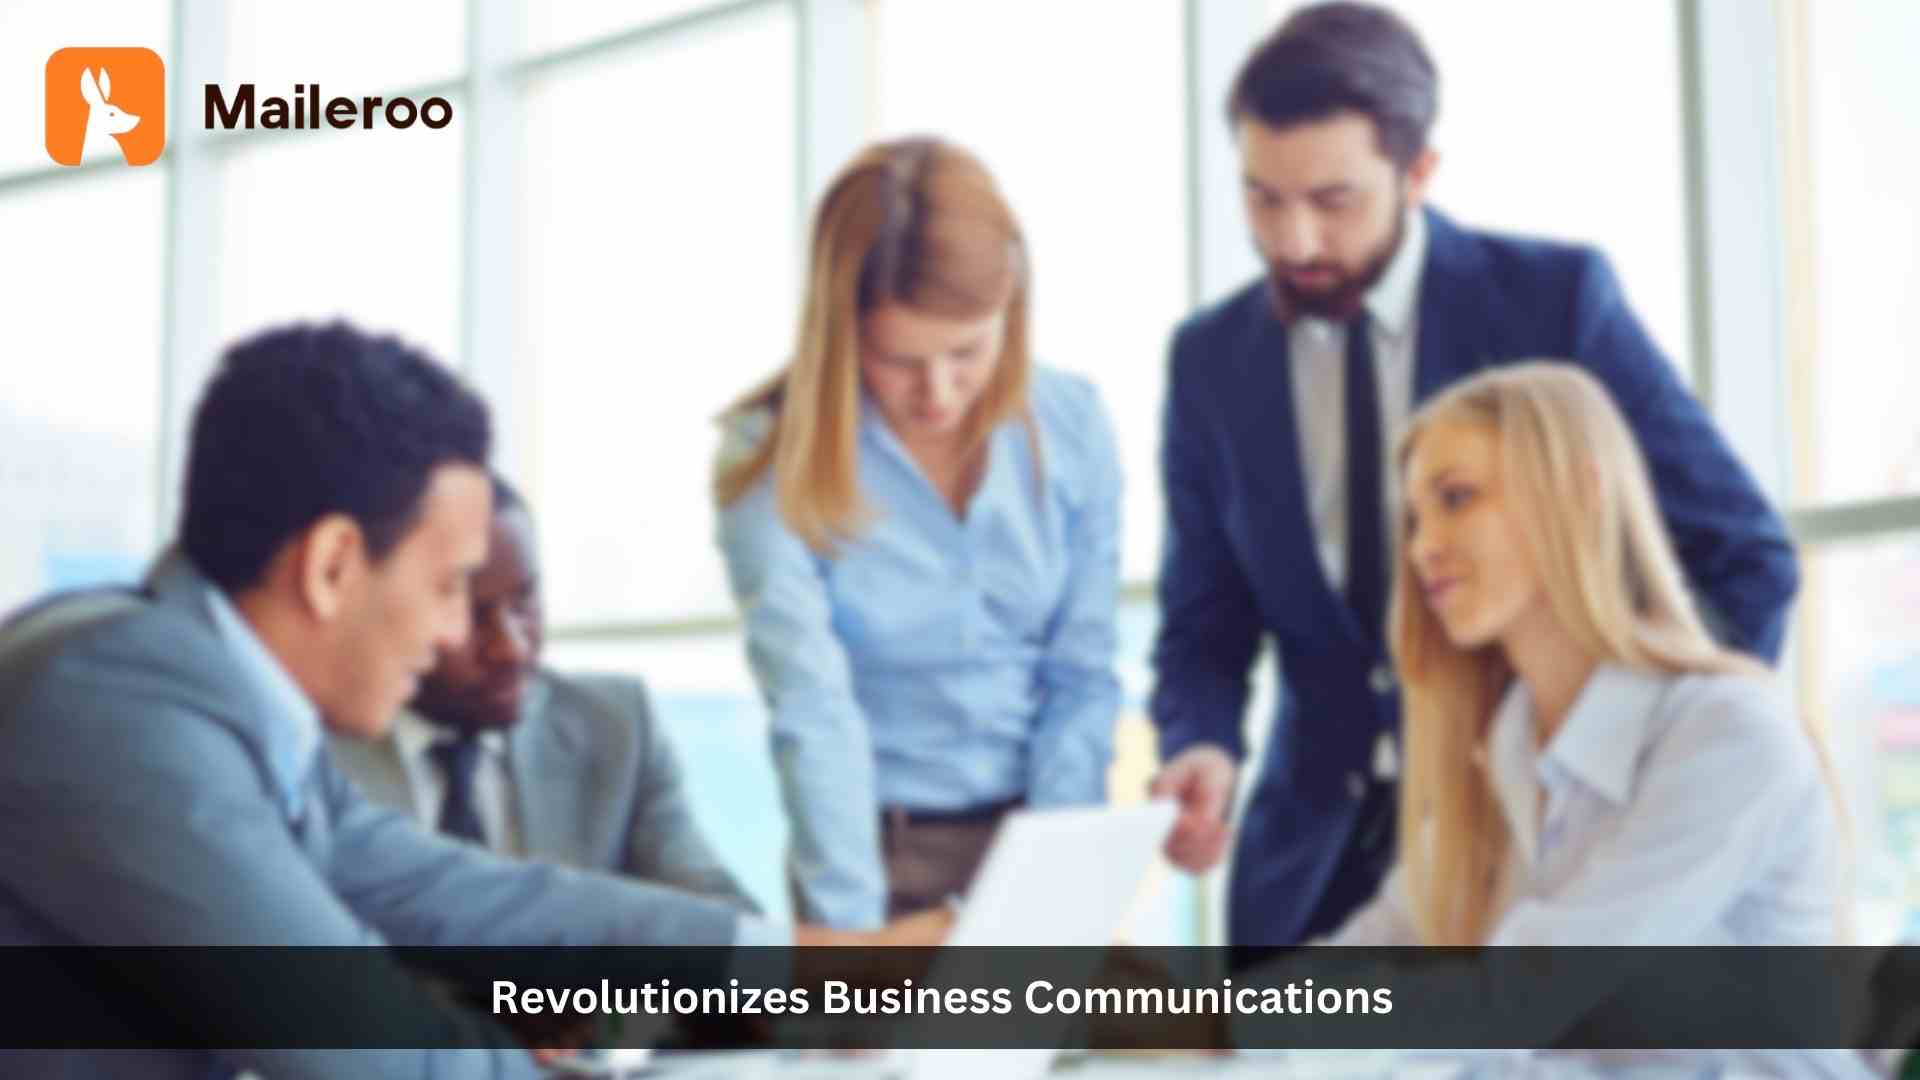 Maileroo Revolutionizes Business Communications with Real-Time Tracking Capabilities for Email Interactions